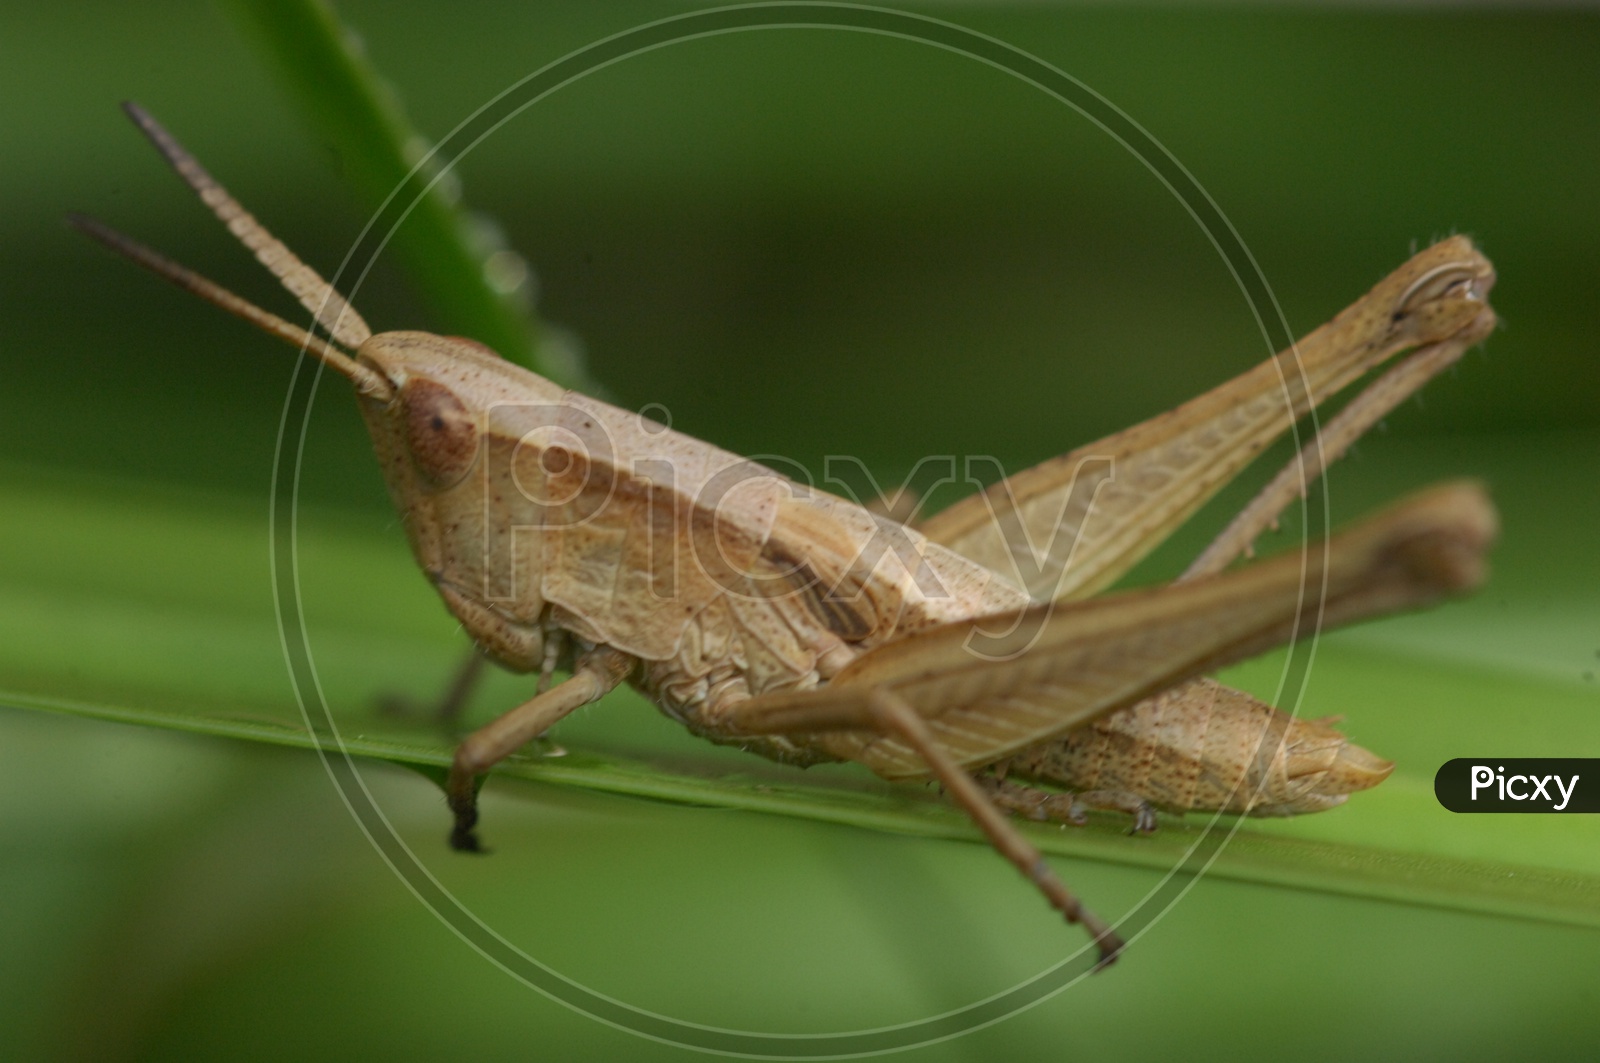 Indian House Cricket on a Leaf